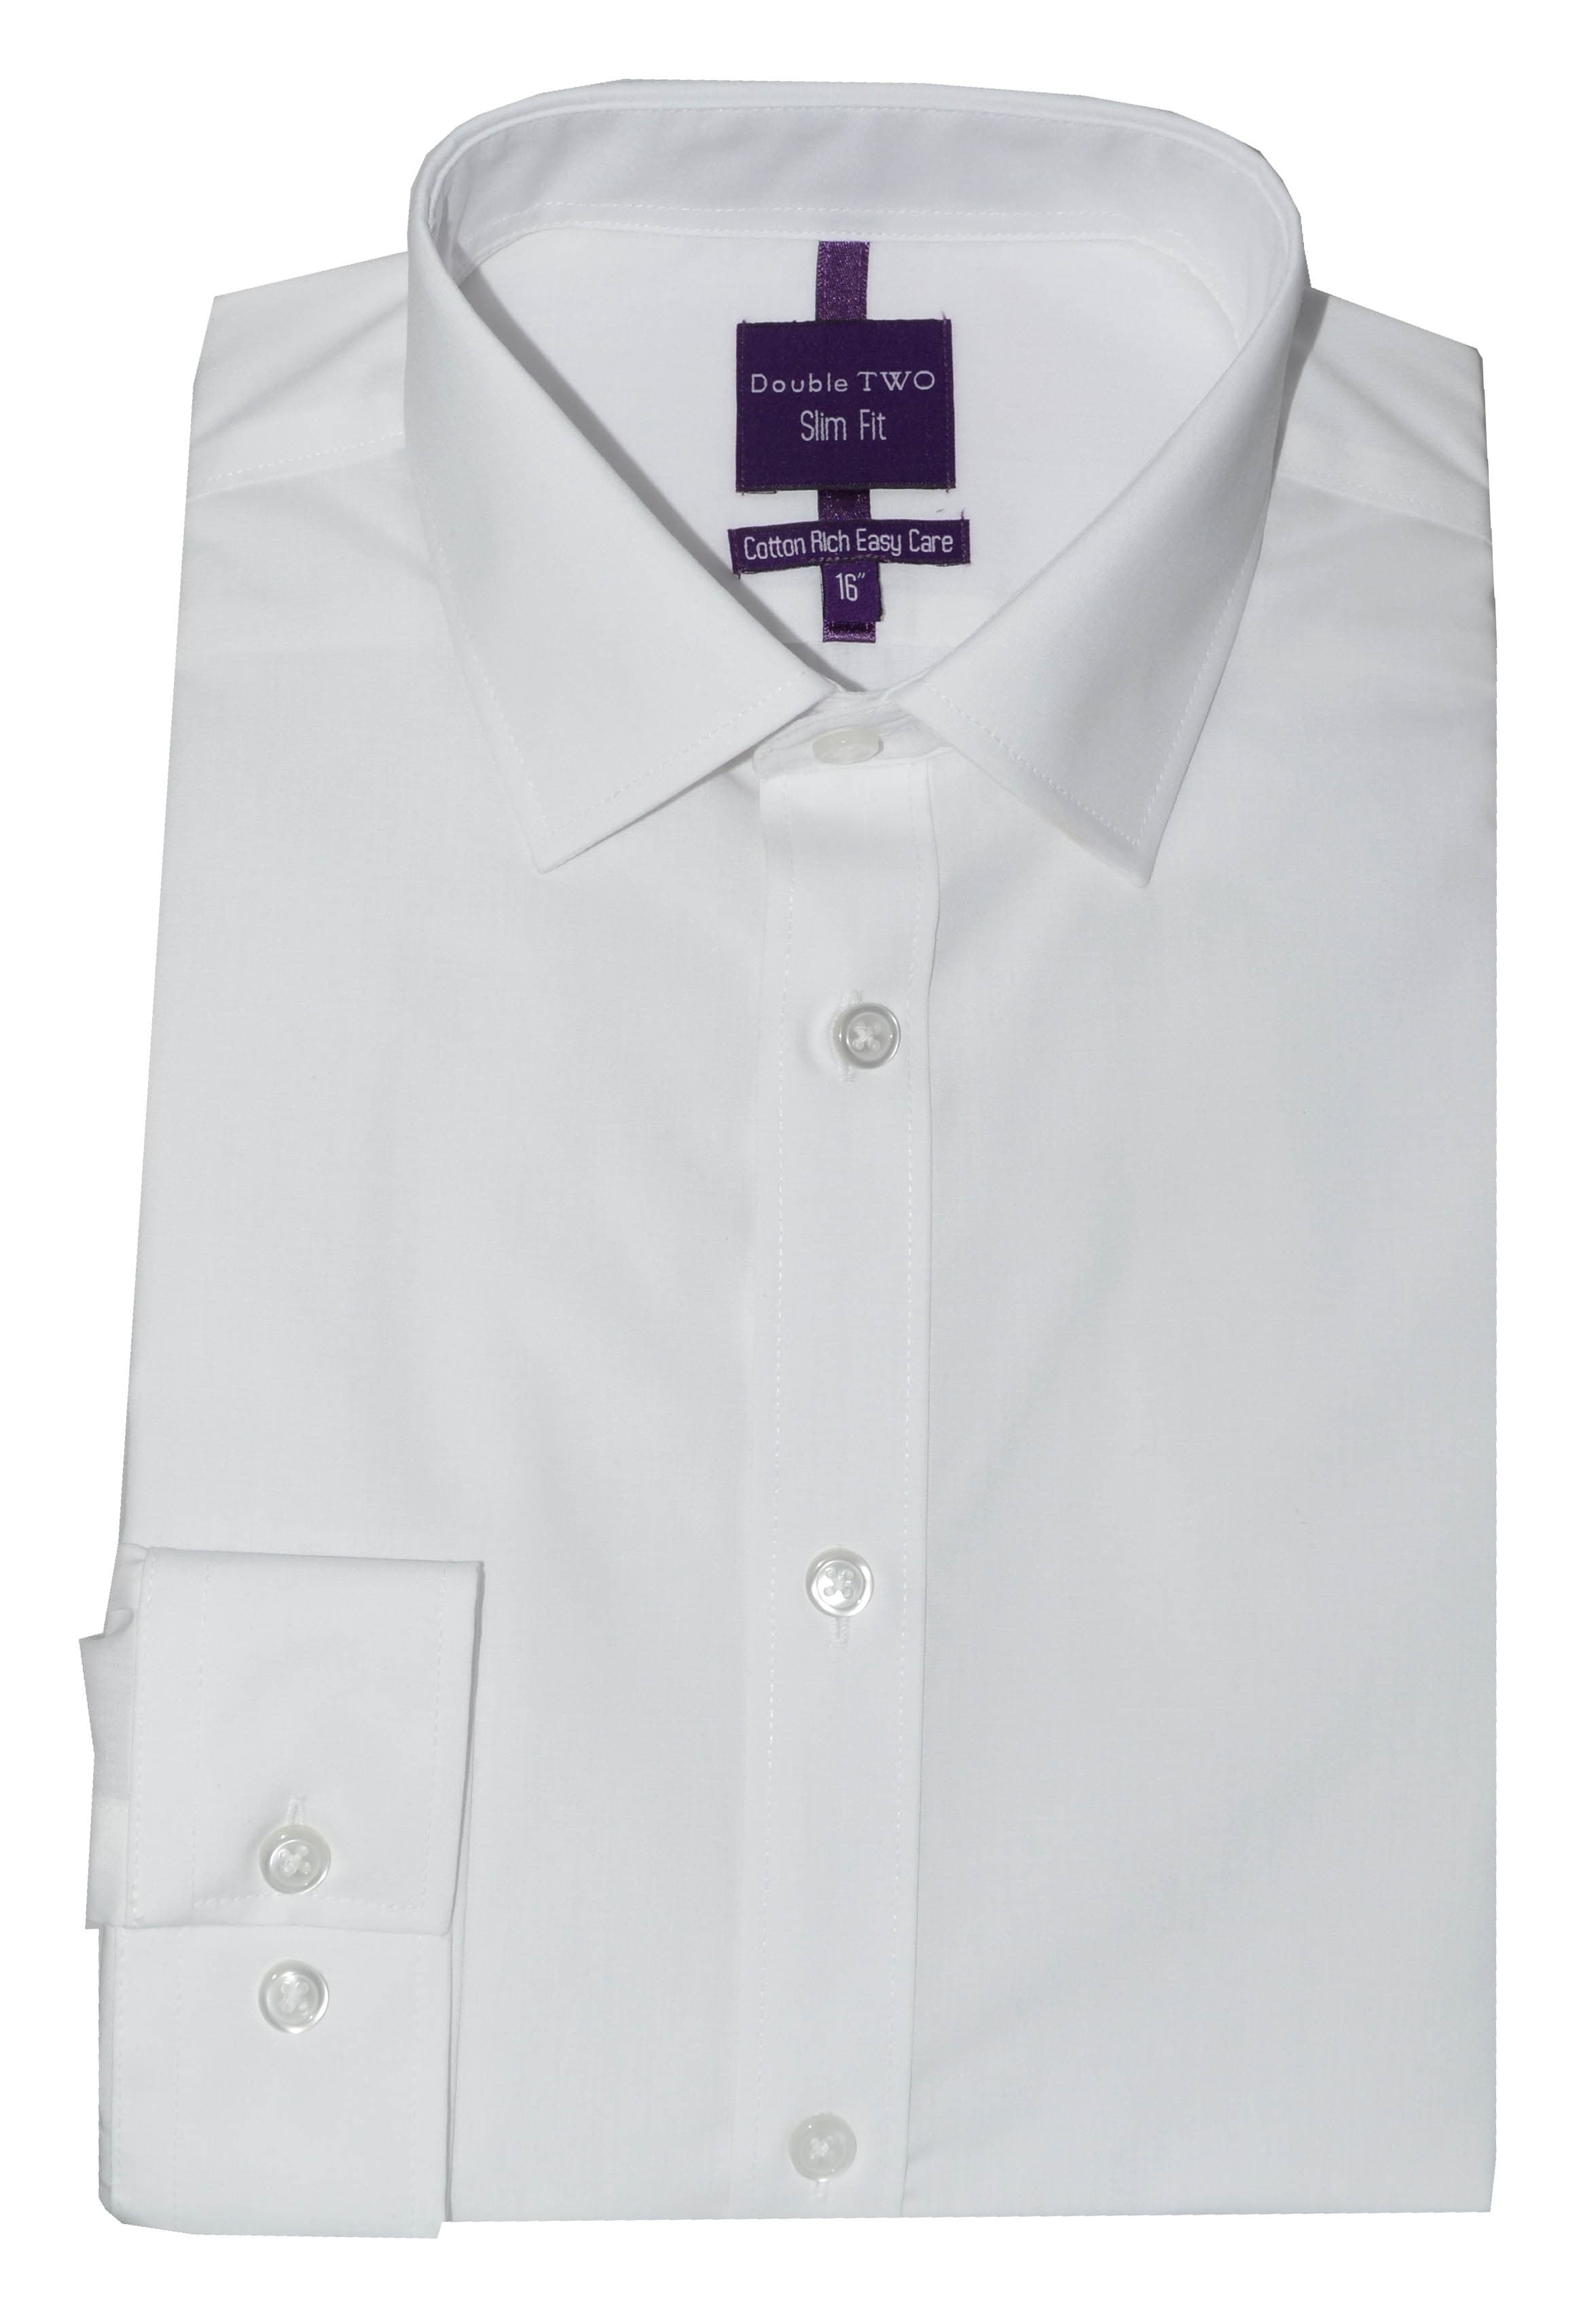 Double TWO Slim Fit White Long Sleeve Non-Iron Shirt